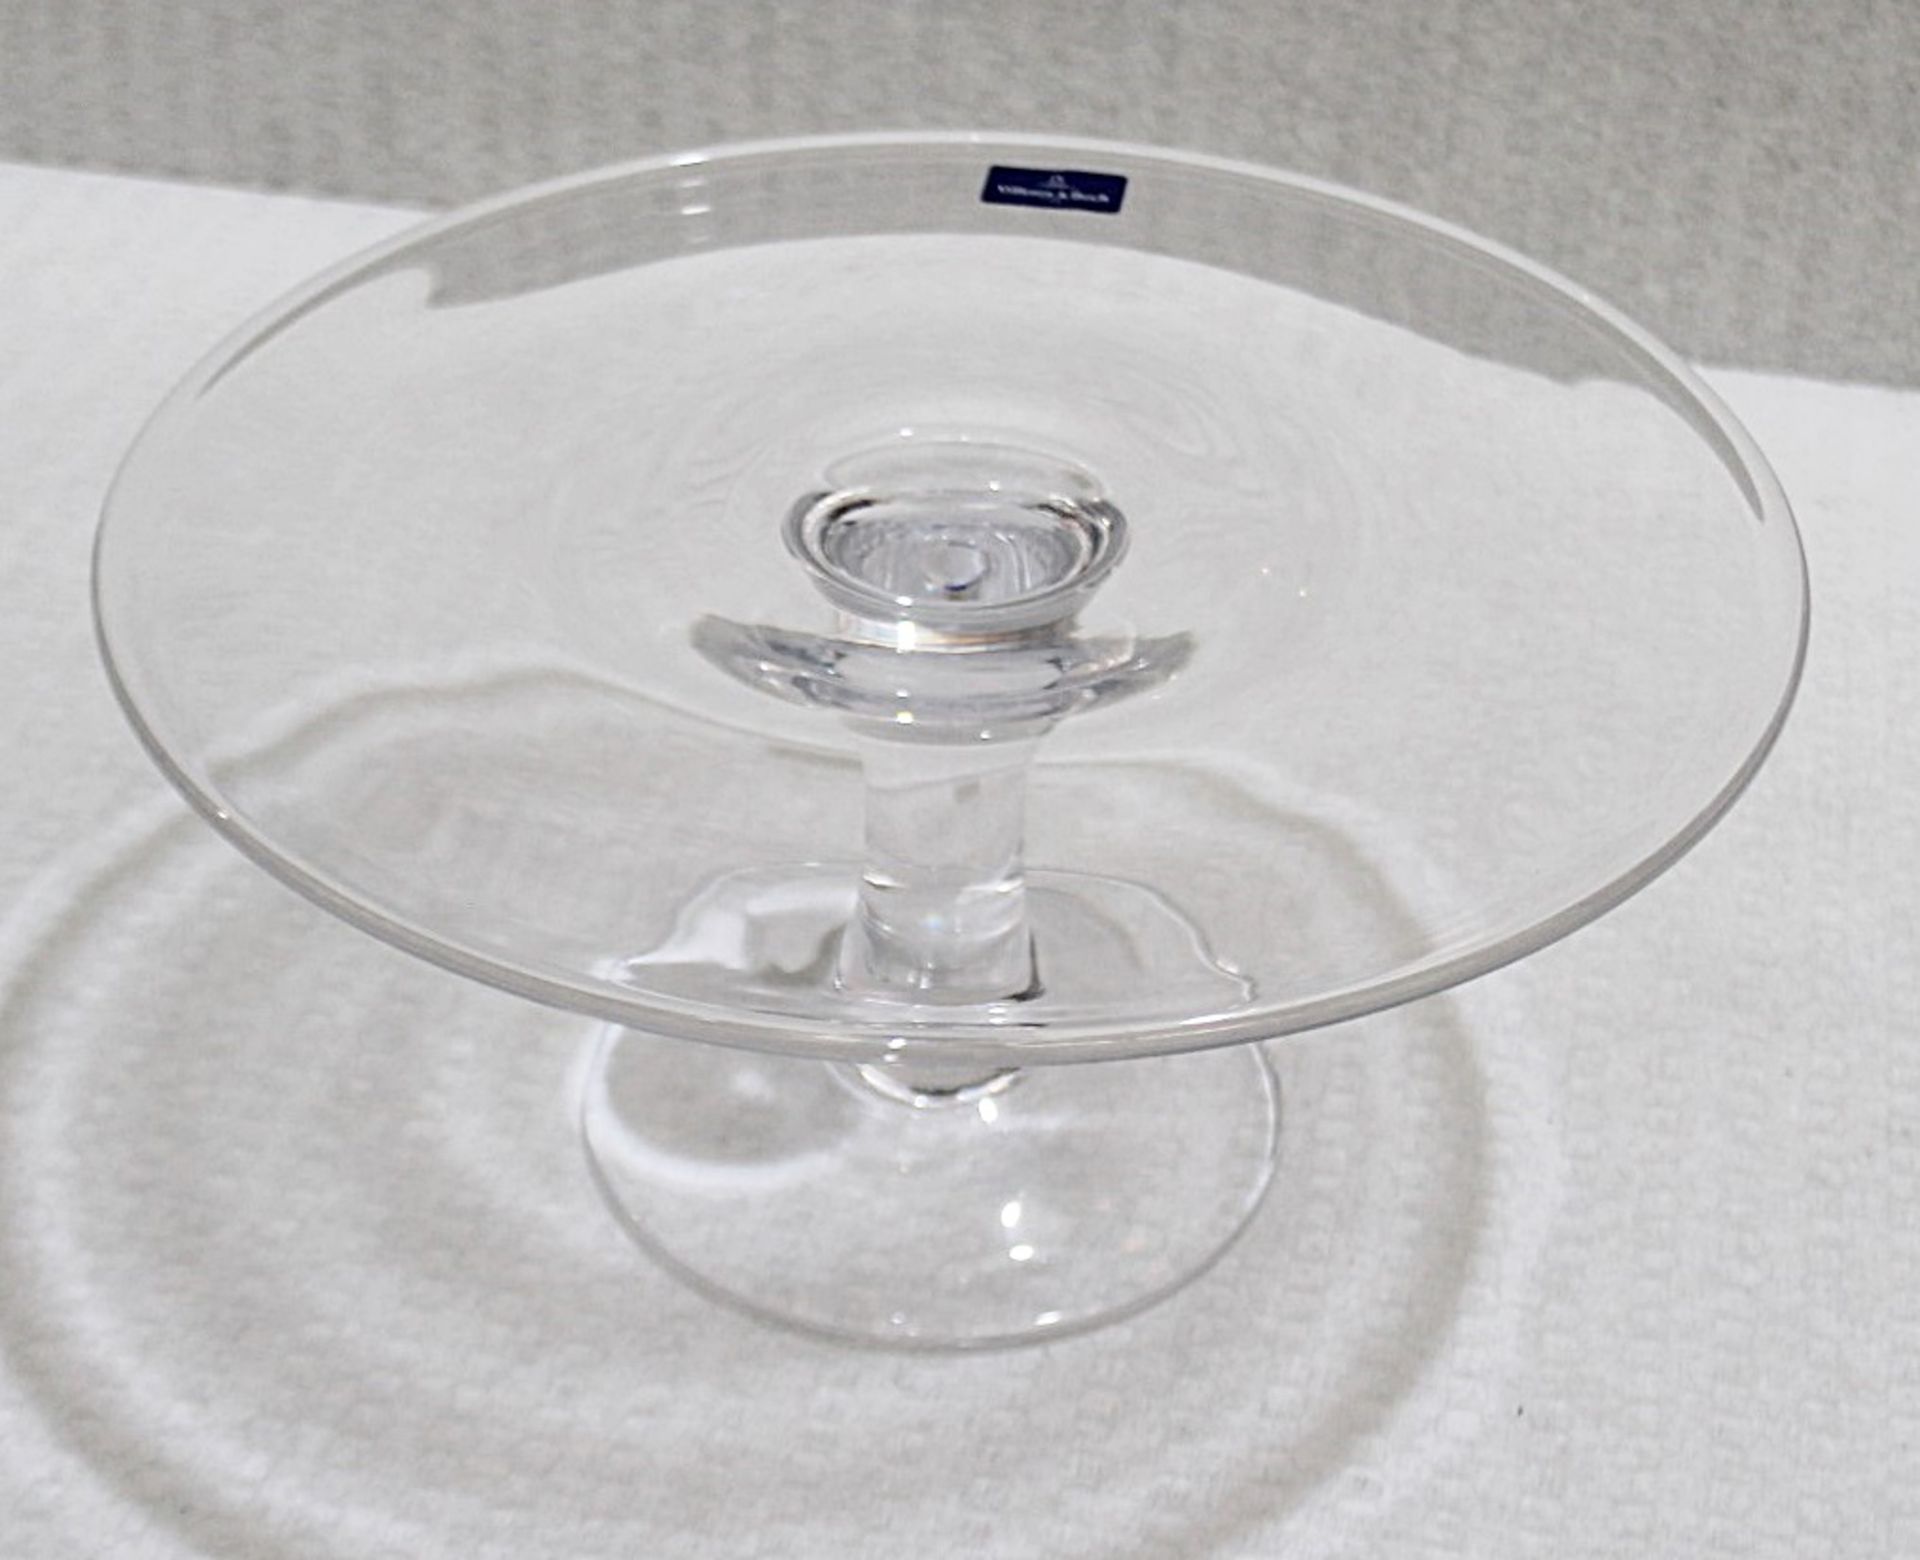 1 x VILLEROY & BOCH 'Retro Accessoires' Crystal Glass Serving Plate / Cake Stand - Image 2 of 6